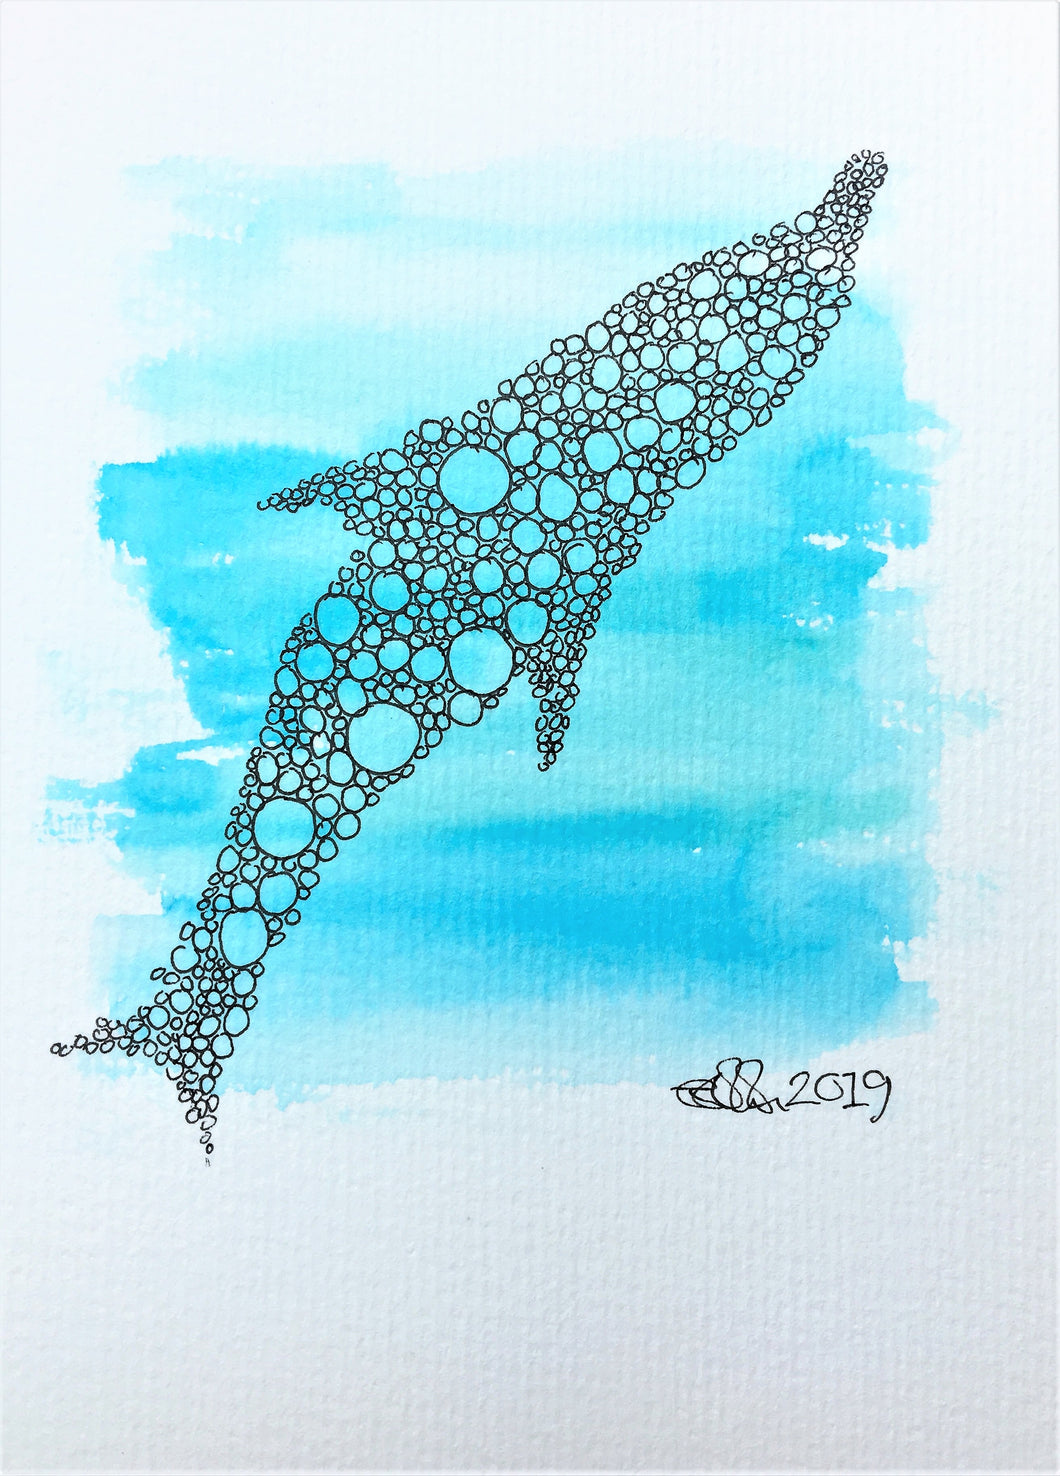 Handpainted Watercolour Greeting Card - Blue abstract circle dolphin design - eDgE dEsiGn London